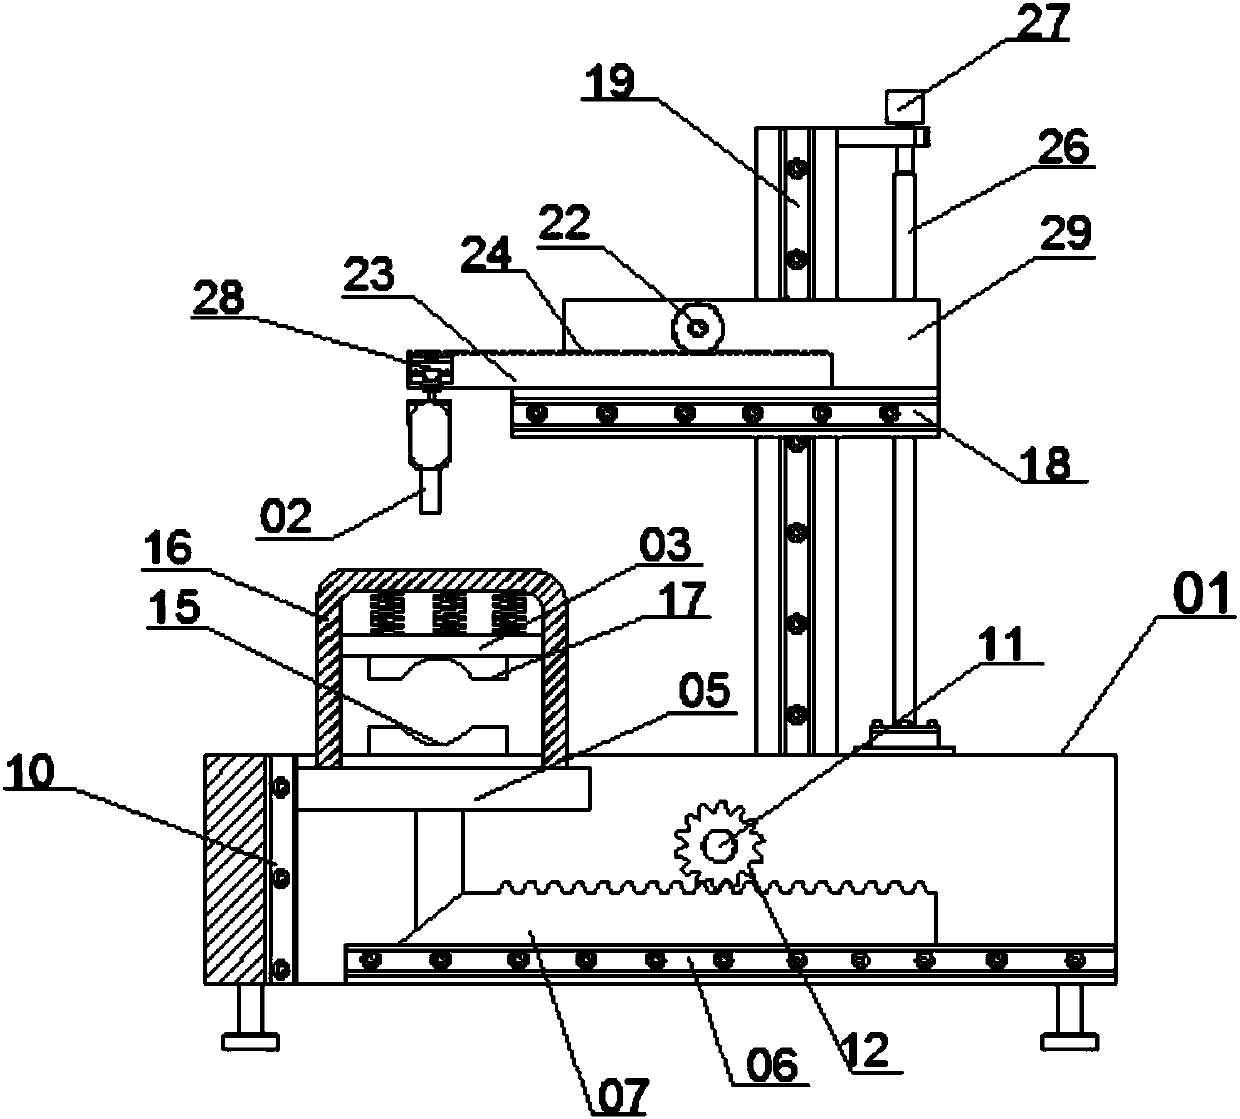 Transmission device for cutting of columns by plasma